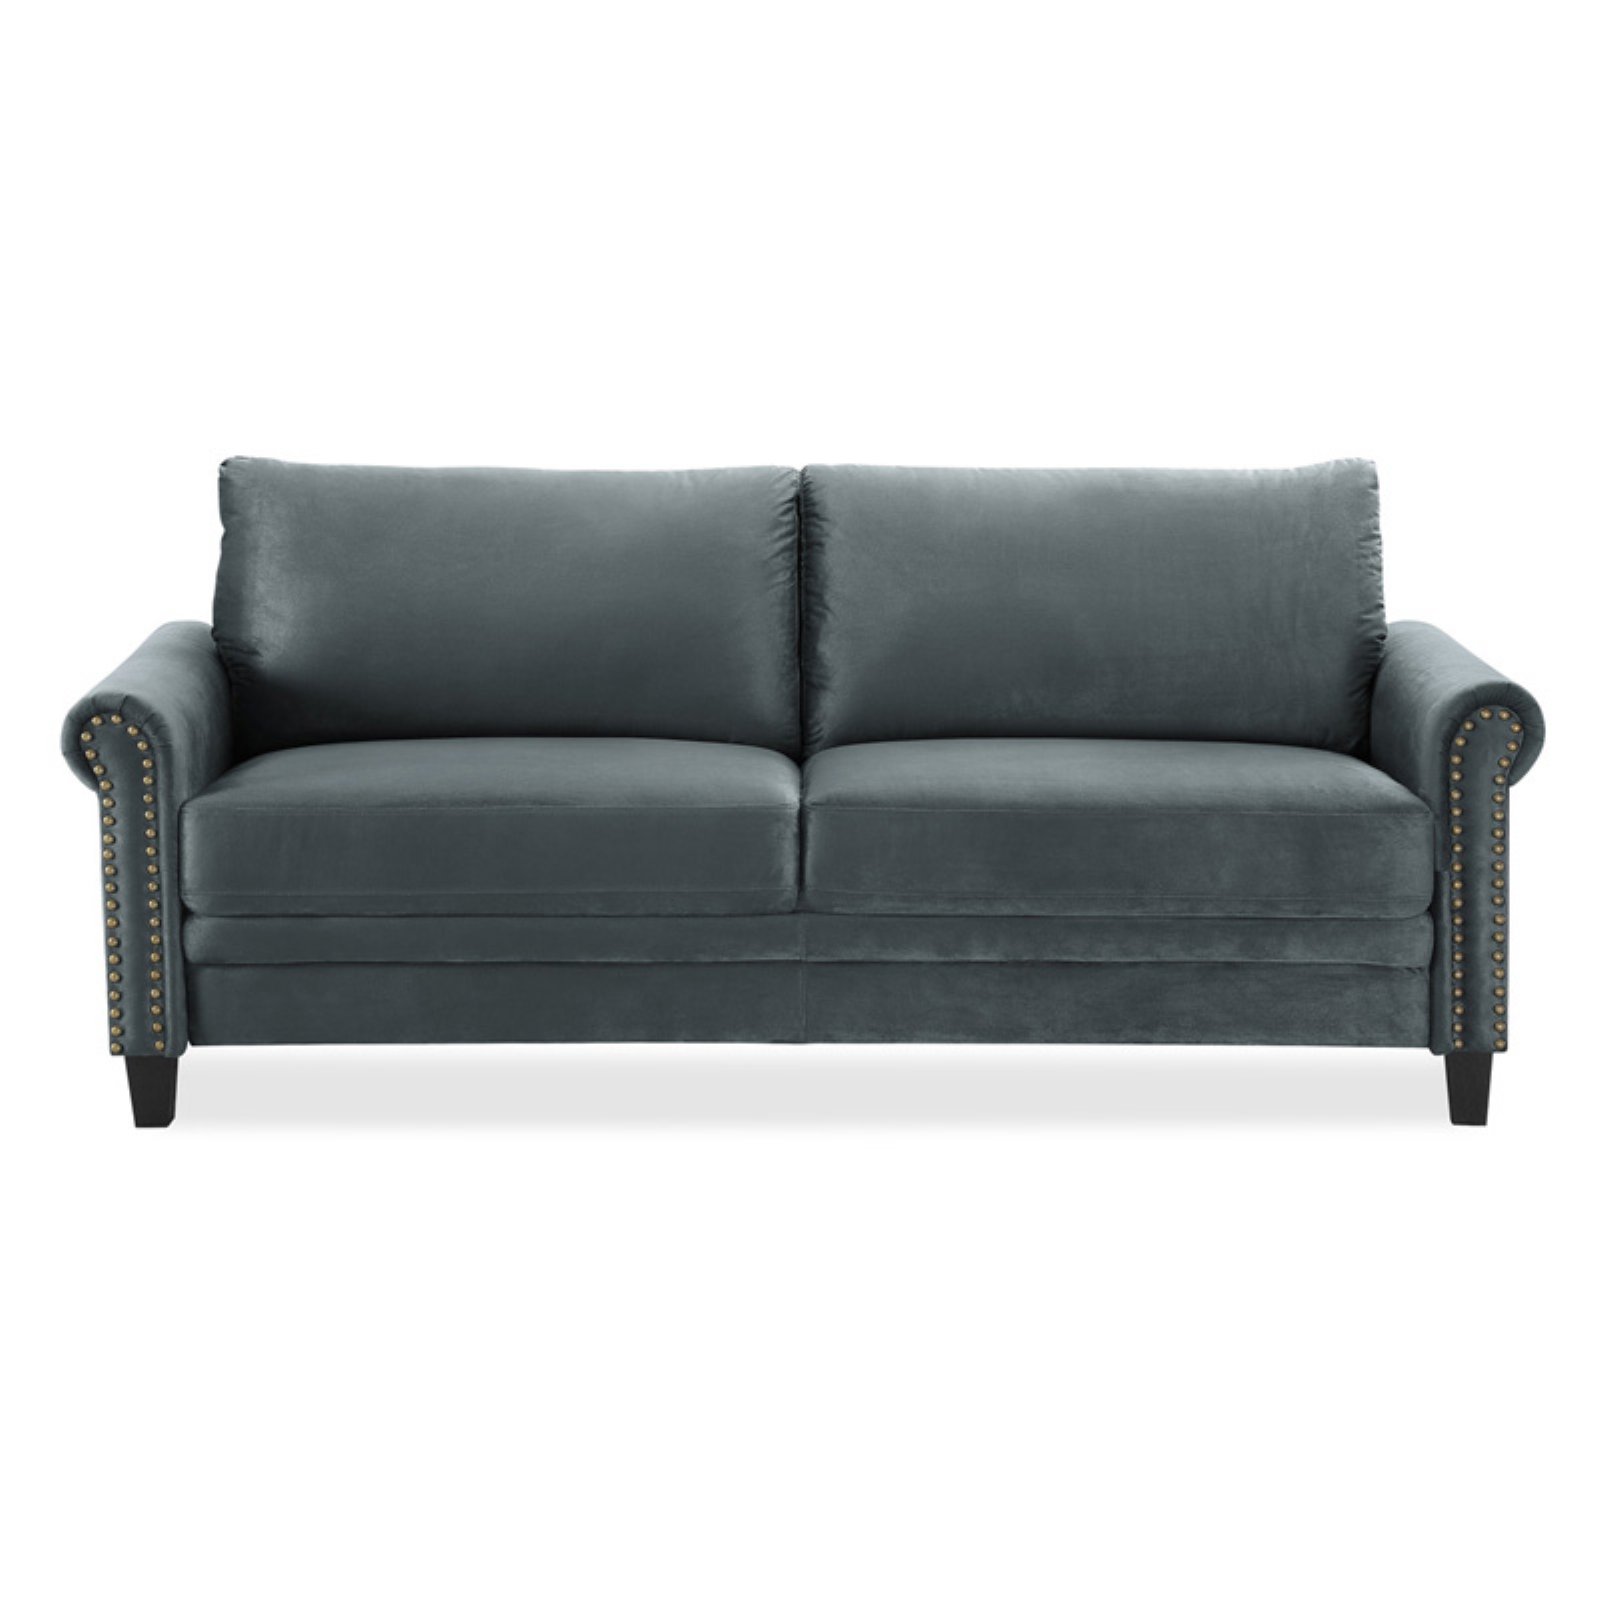 Lifestyle Solutions Fallon Rolled Arms Sofa, Gray Fabric - image 1 of 9